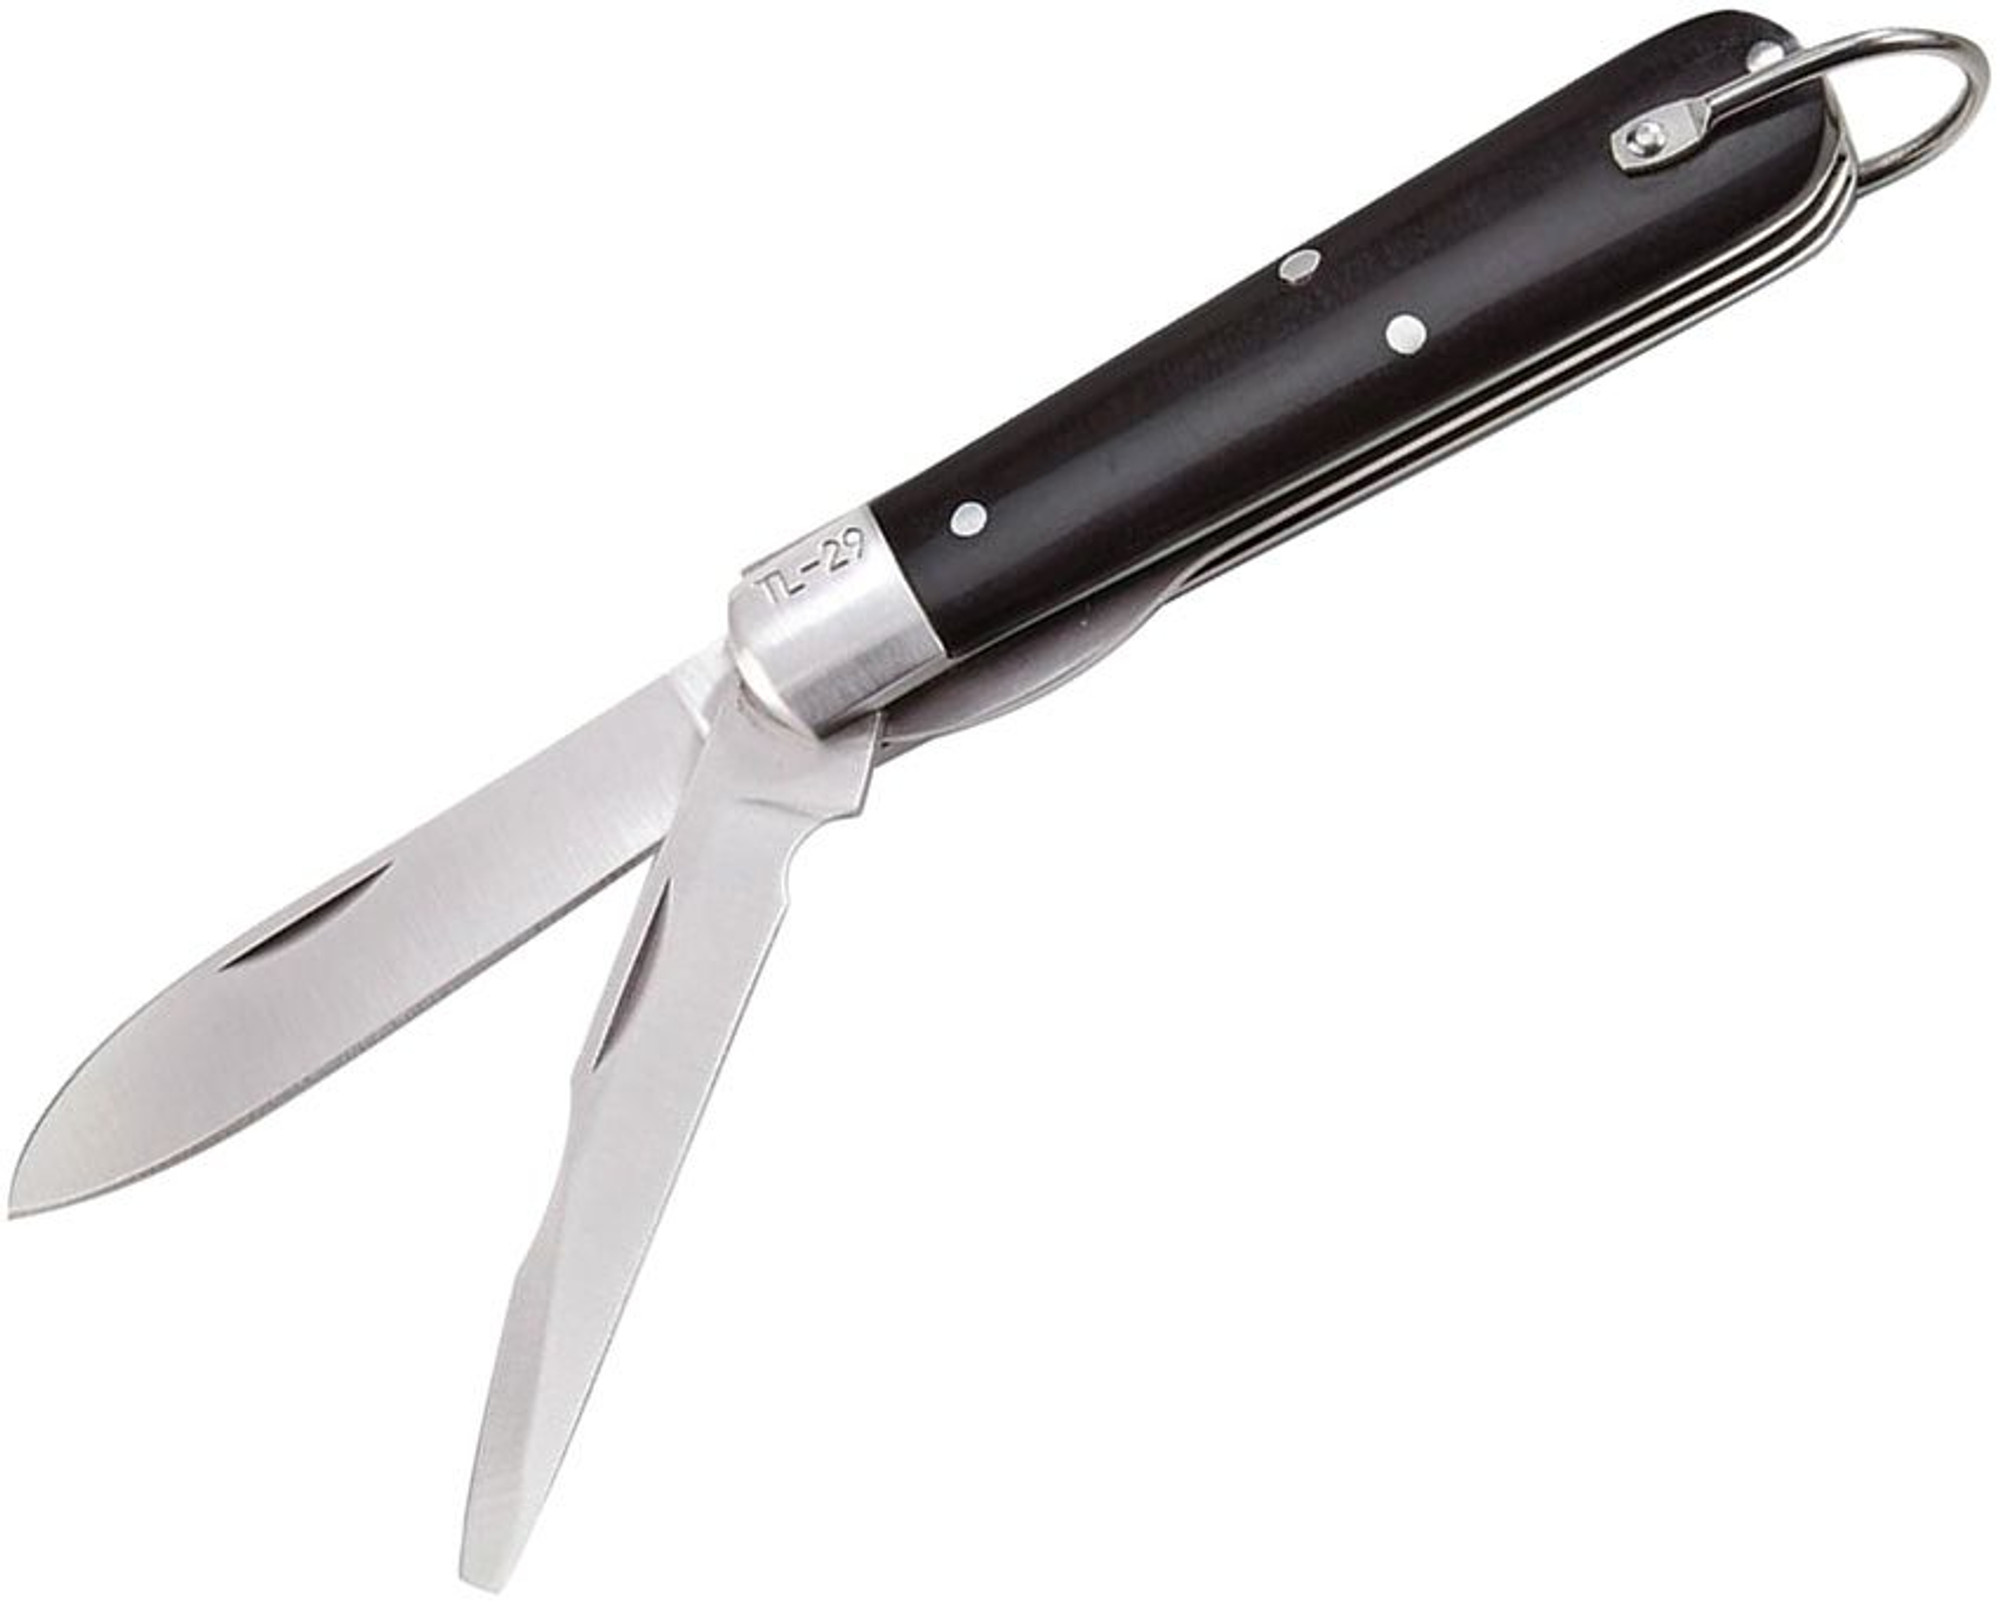  Miscellaneous TL29 Electrician Knife